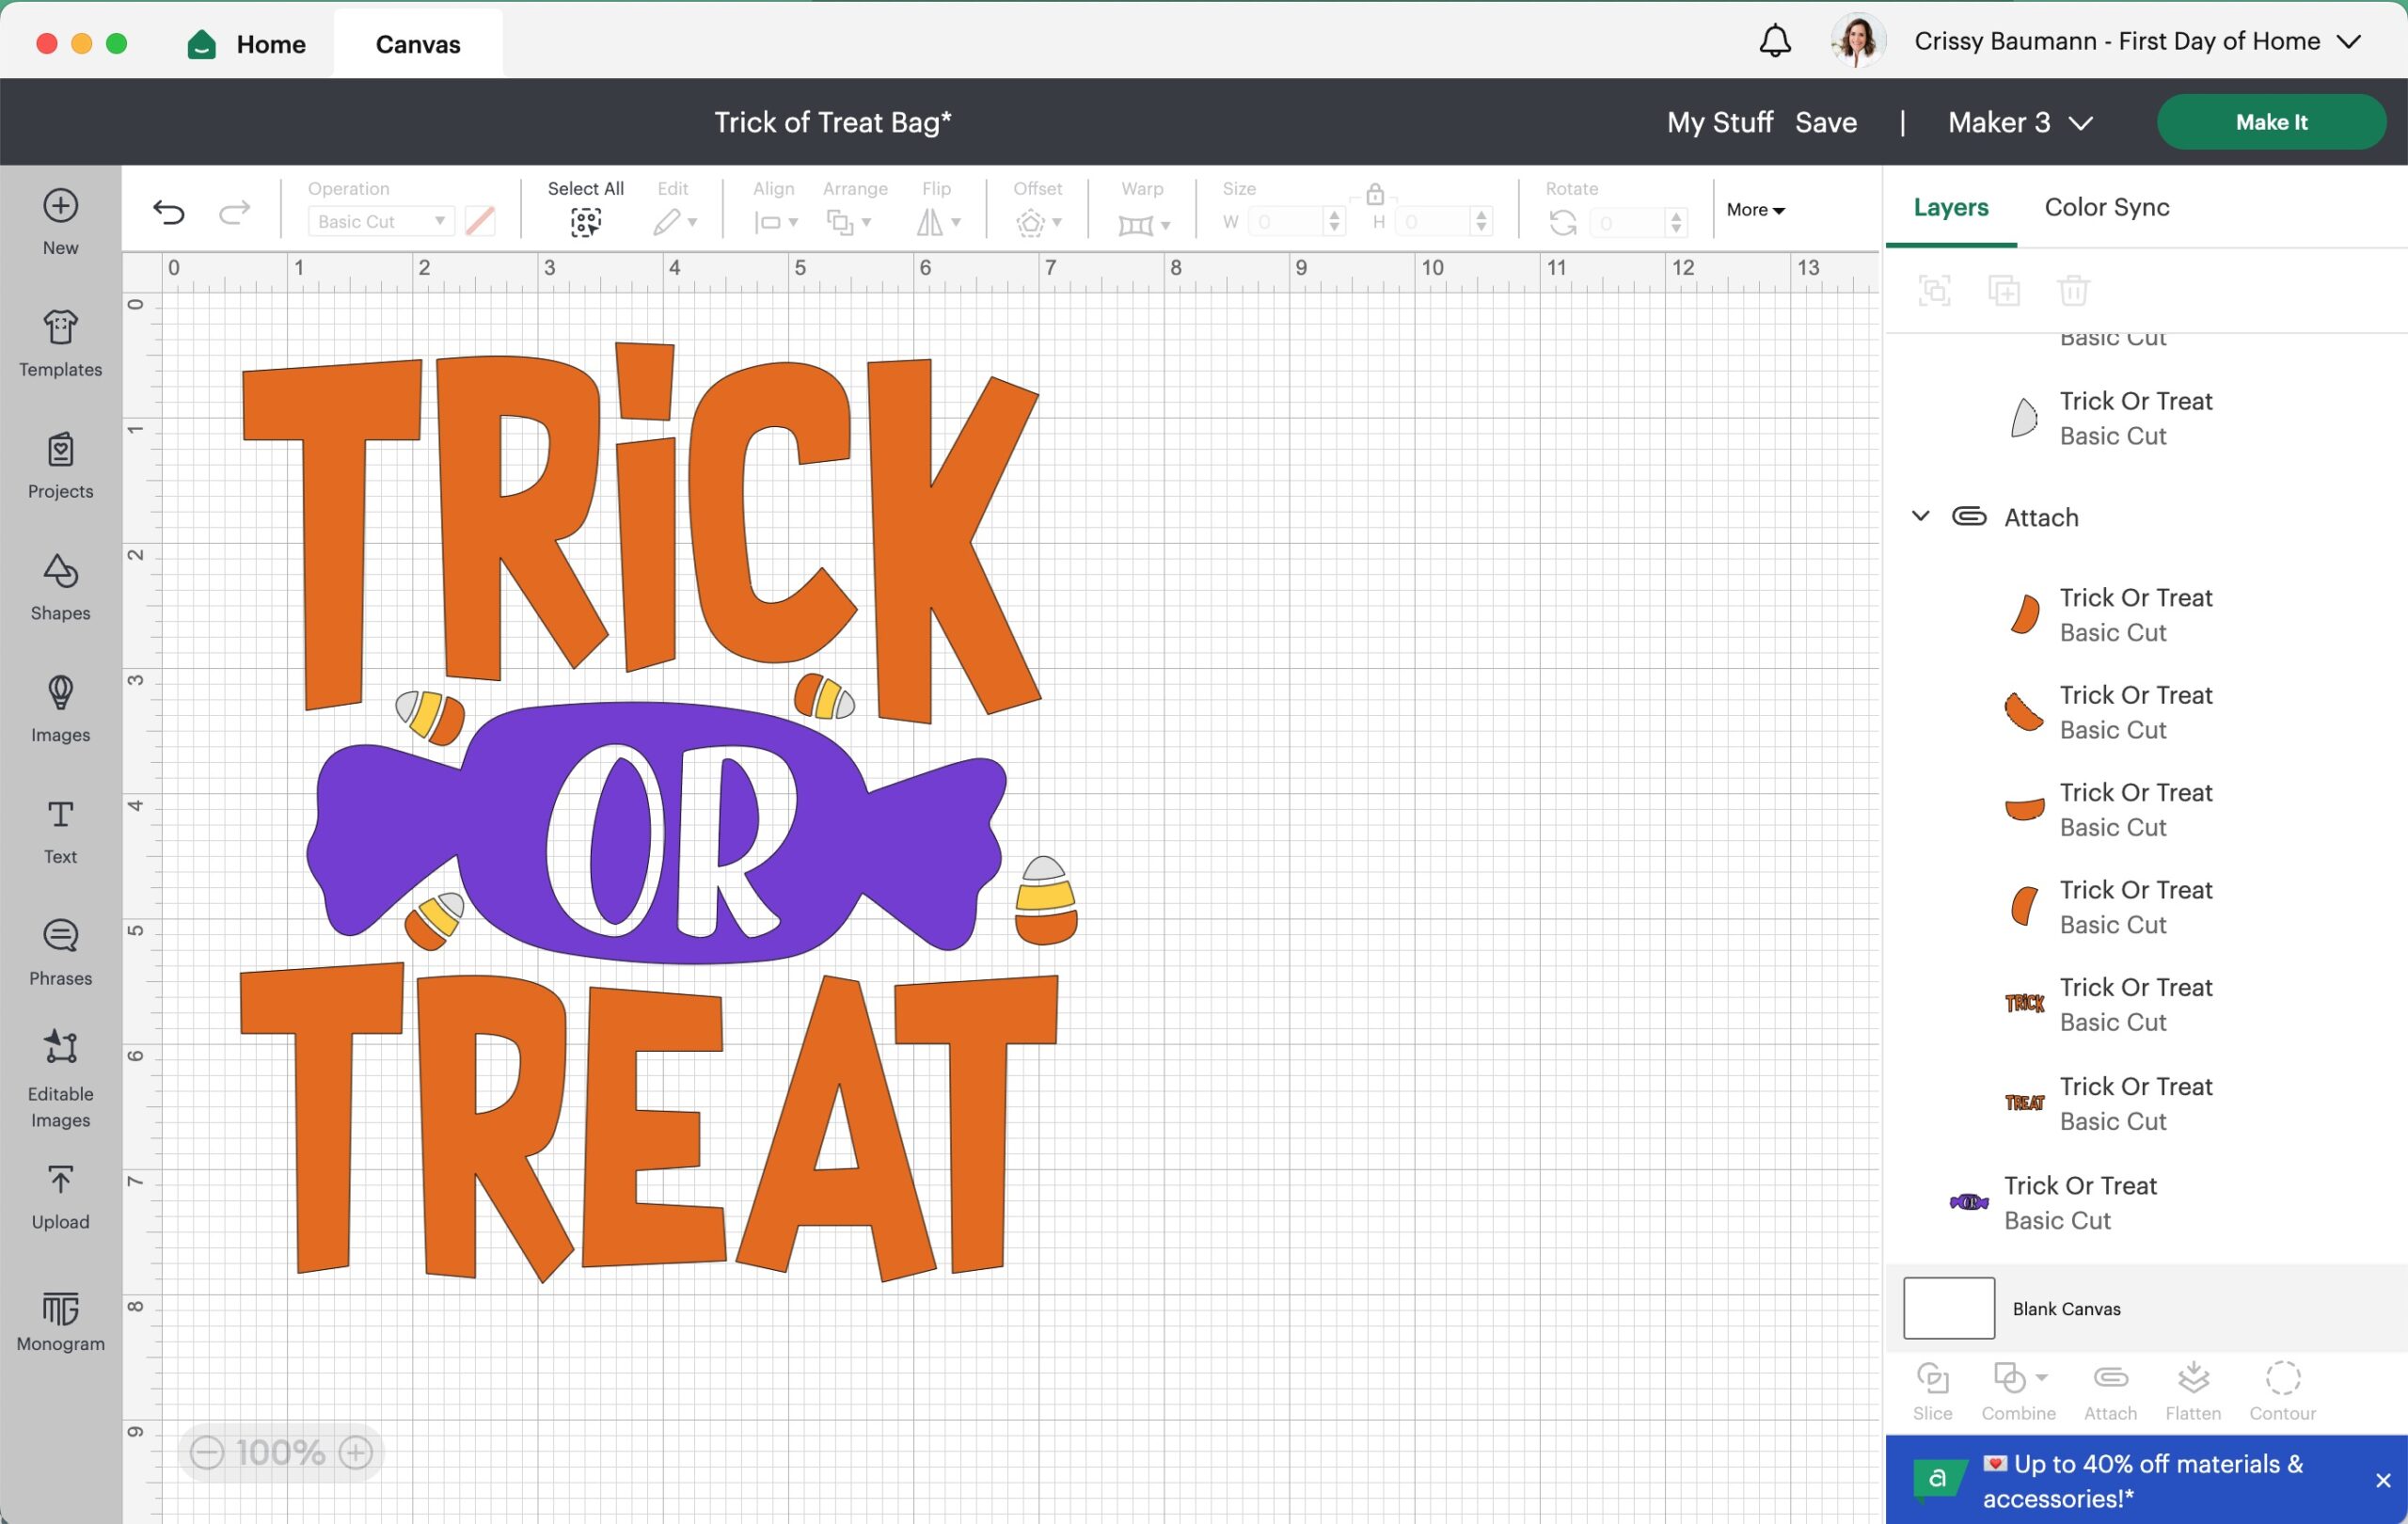 Trick or Treat design in Cricut Design Space with layers of similar colors "Attached" before cutting.